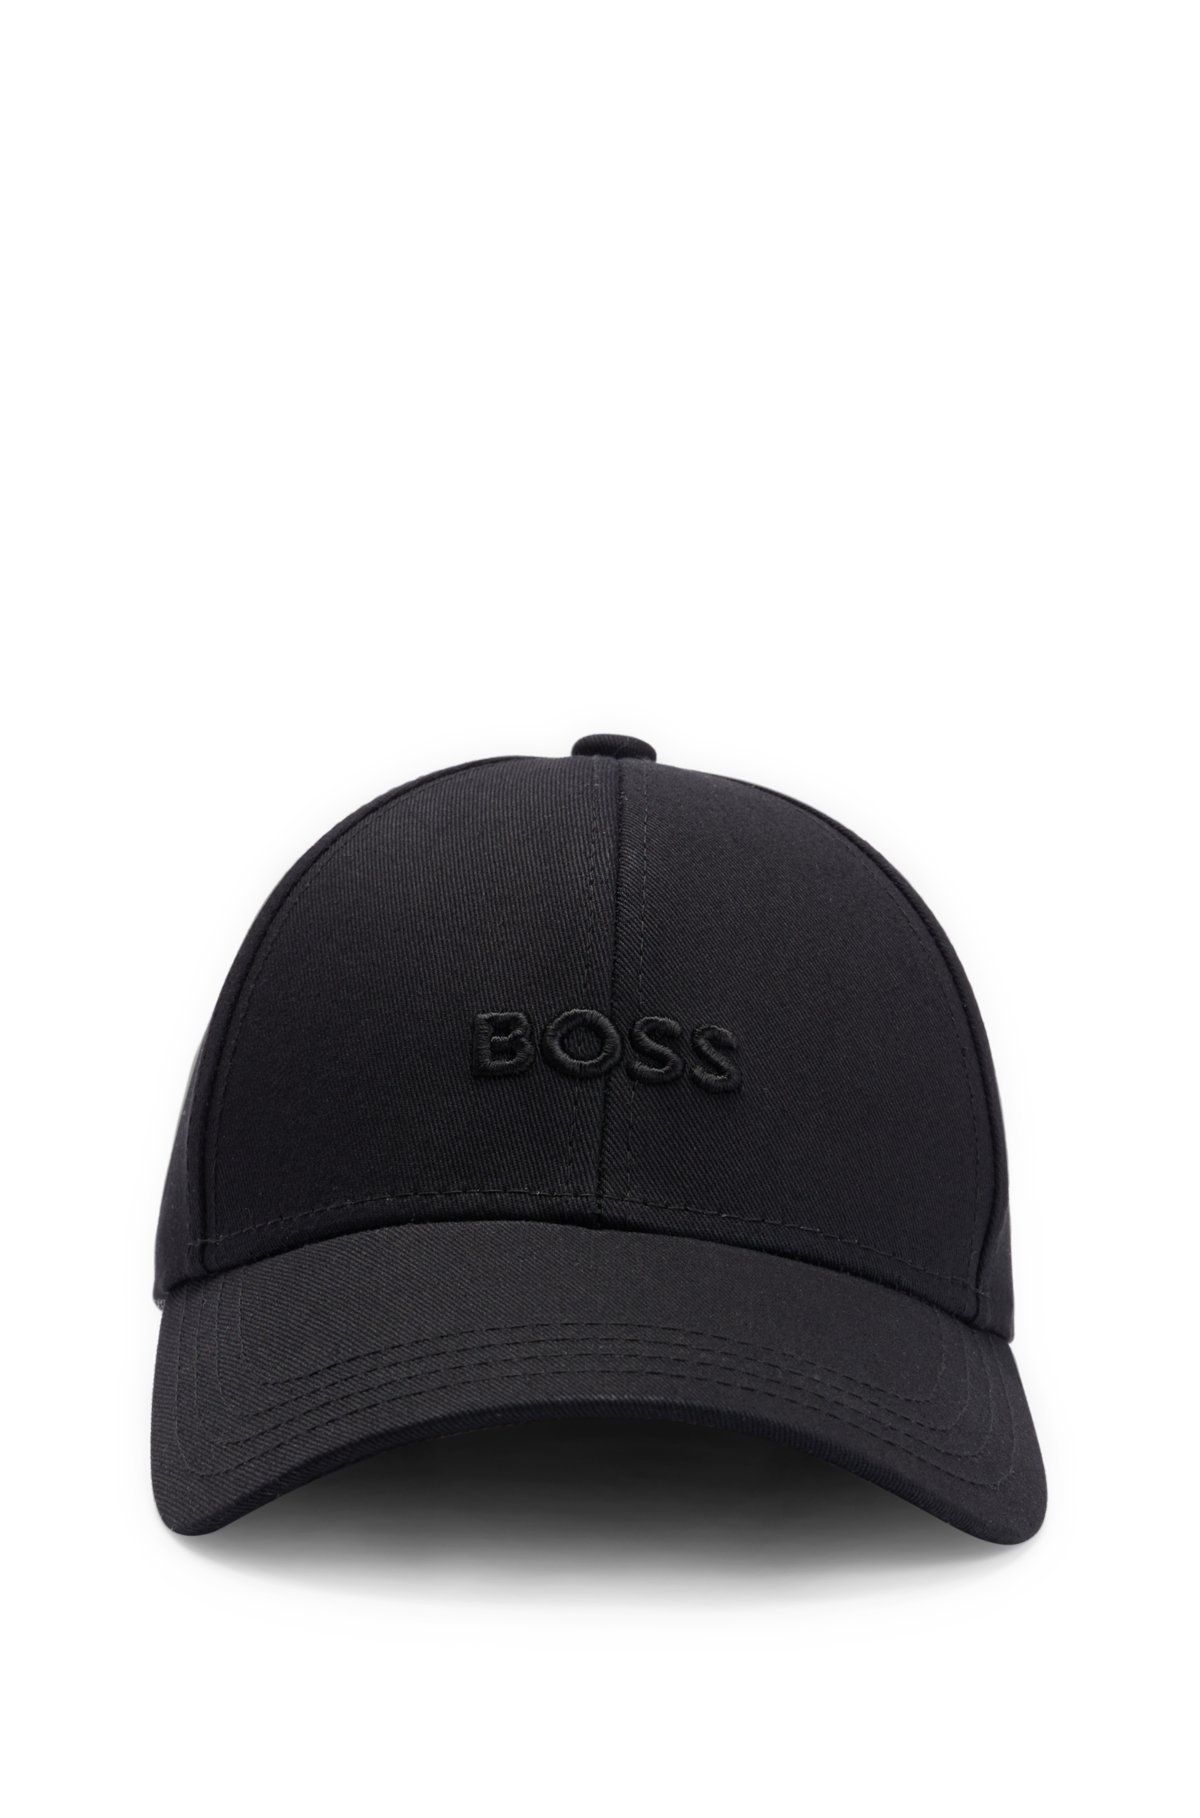 BOSS - embroidered logo with cap Cotton-twill